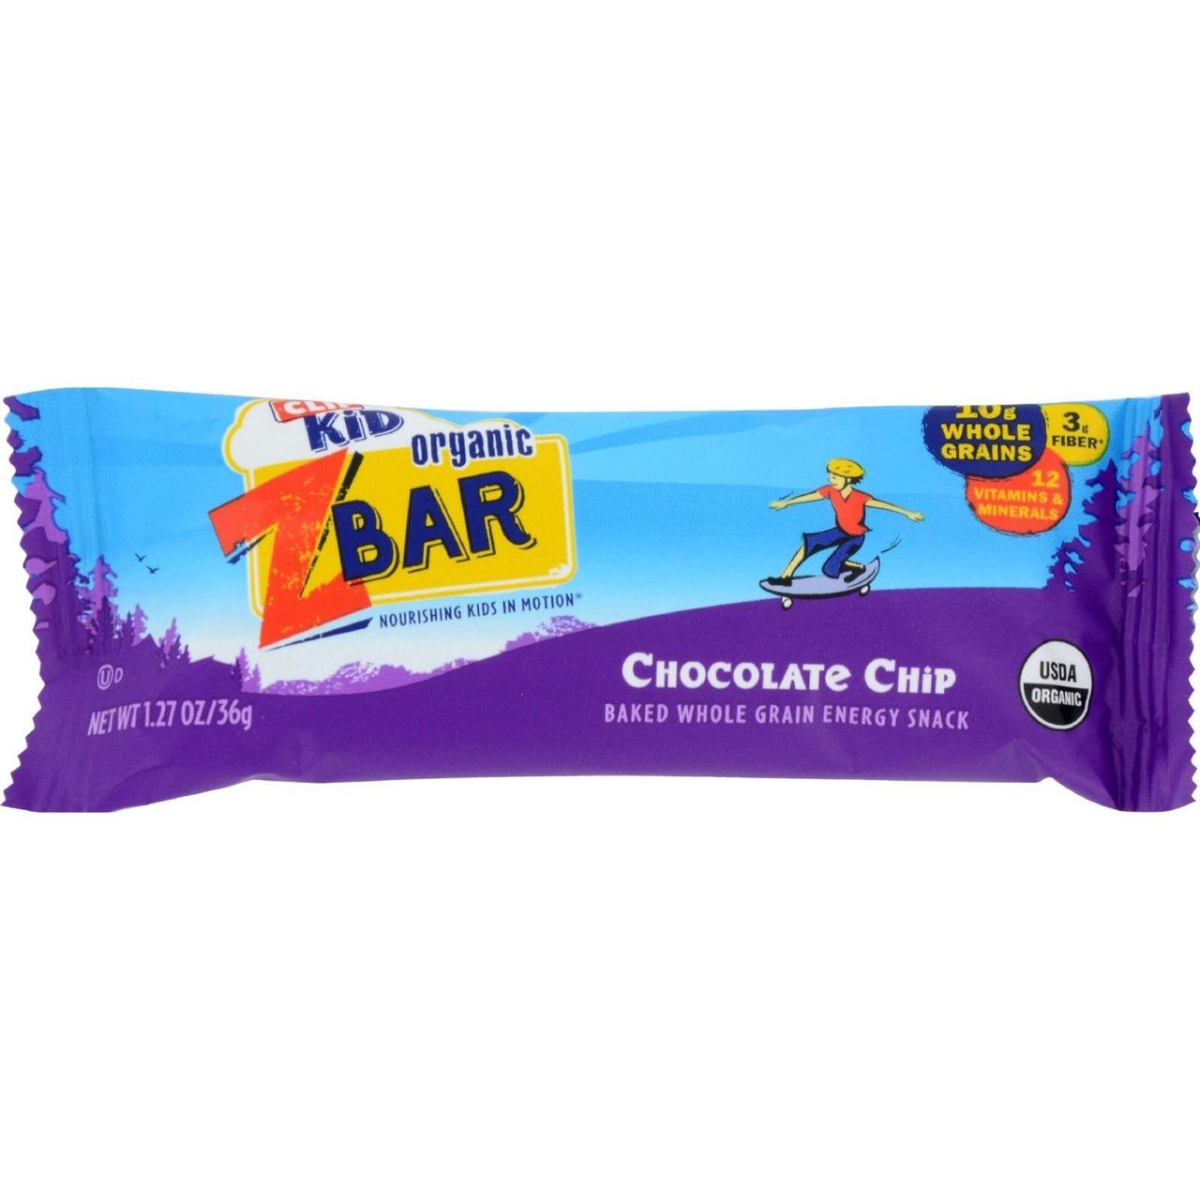 Picture of Clif Bar HG0807917 1.27 oz Organic Chocolate Chip Zbar - Case of 18